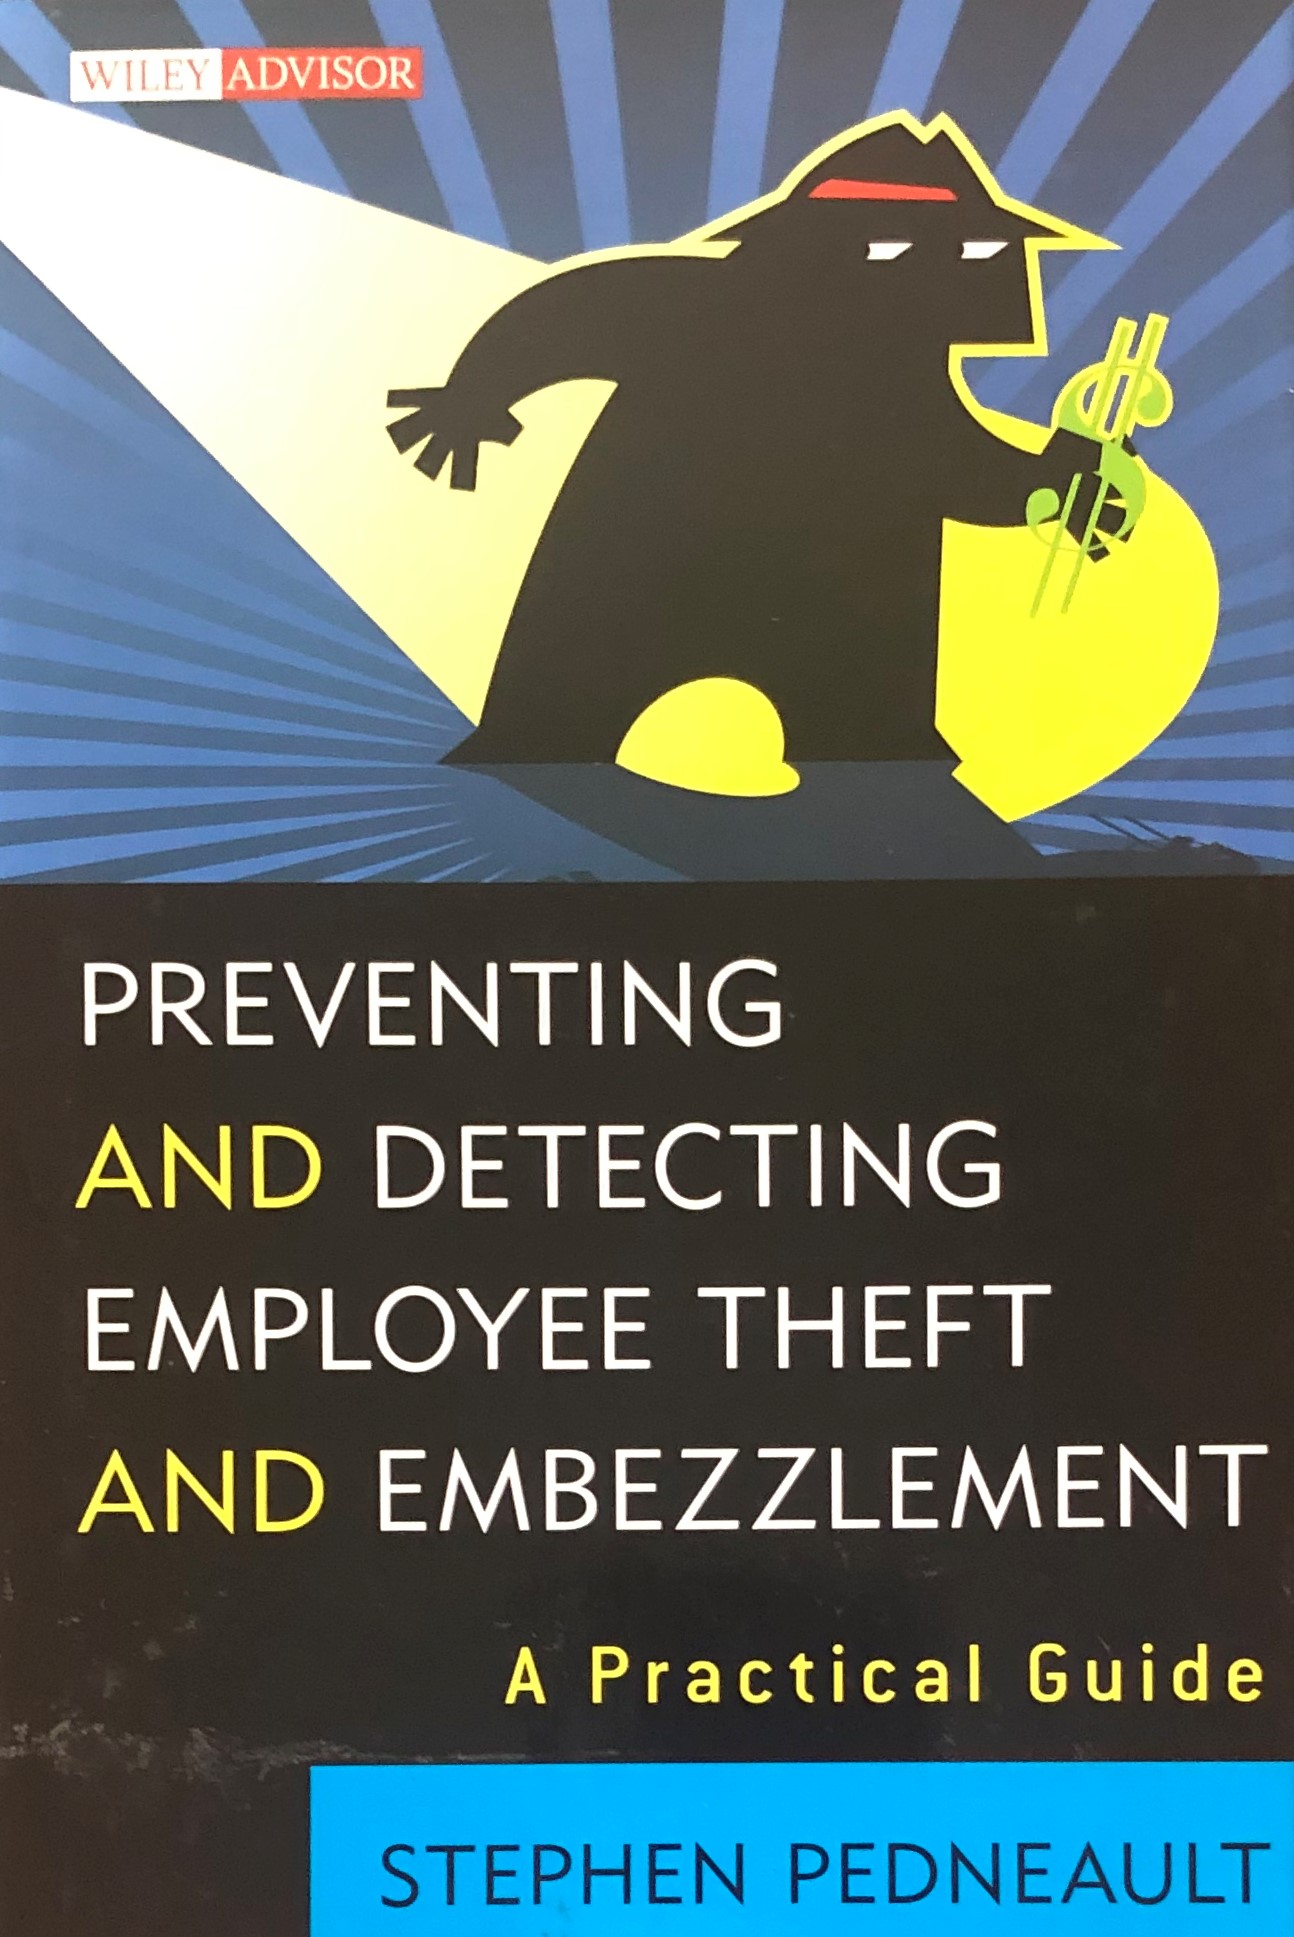 Description Preventing and Detecting Employee Theft and Embezzlement: A Practical Guide